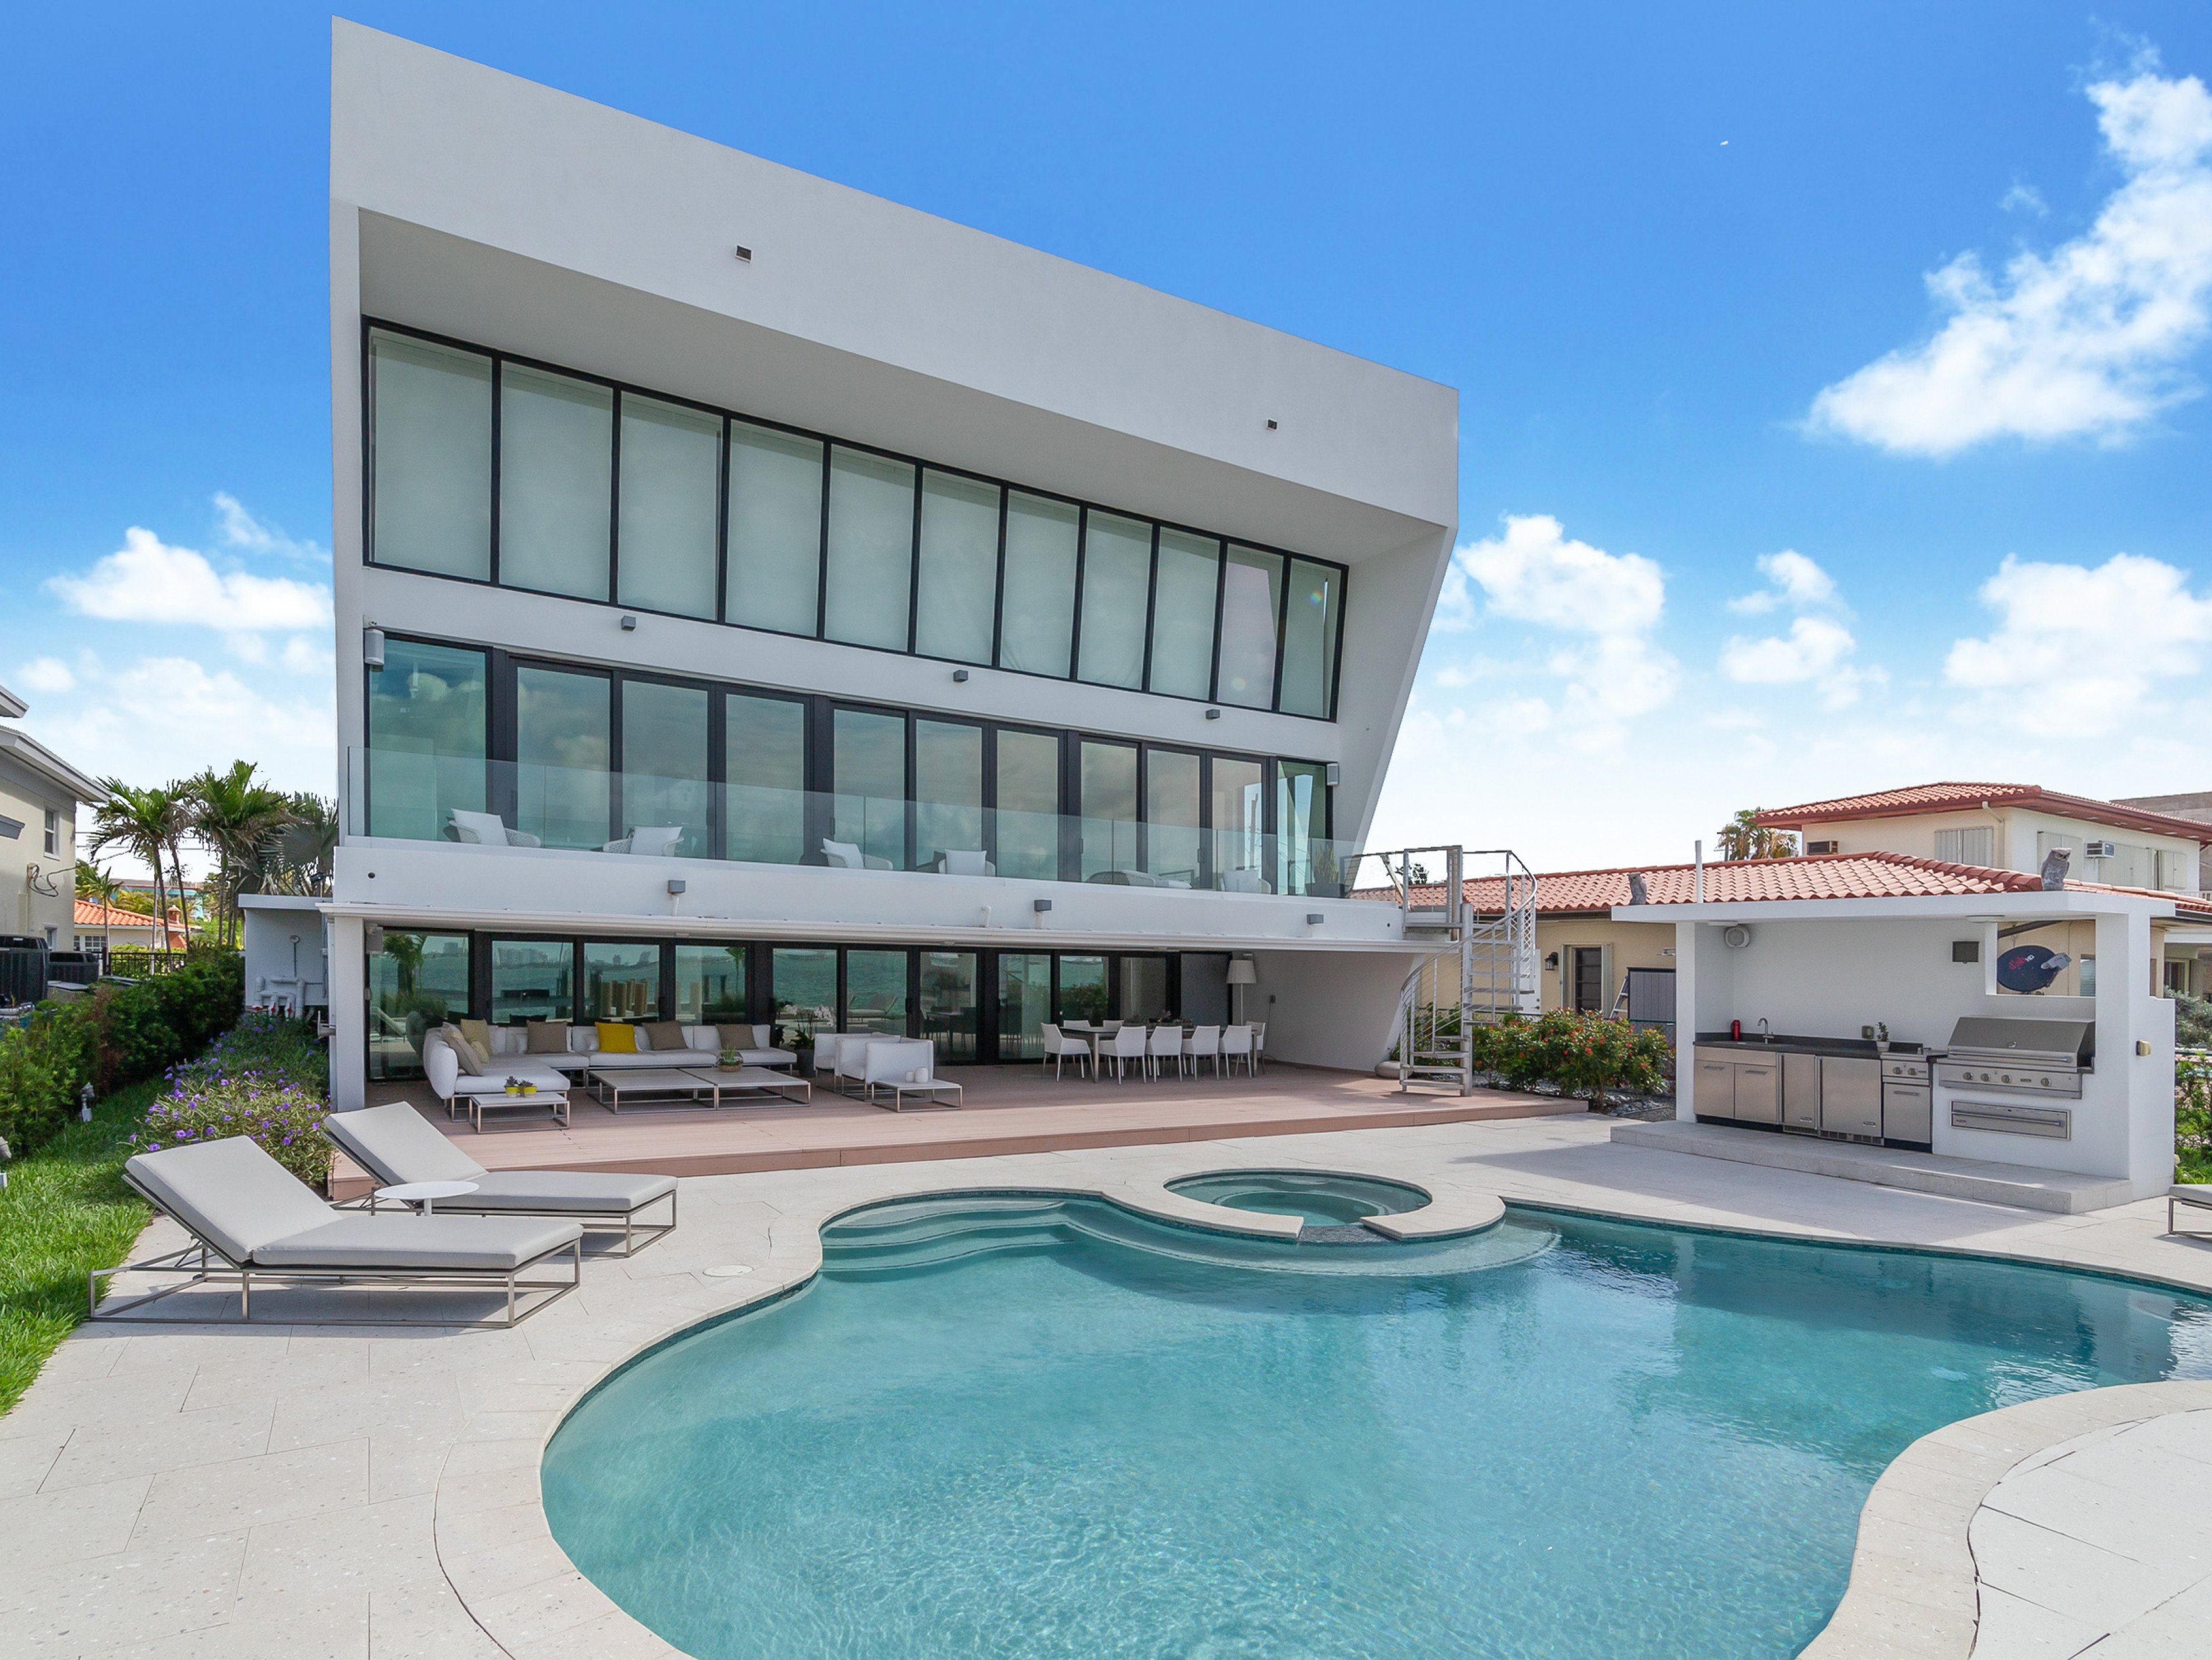 Miami 45 Large vacation rentals for sports groups